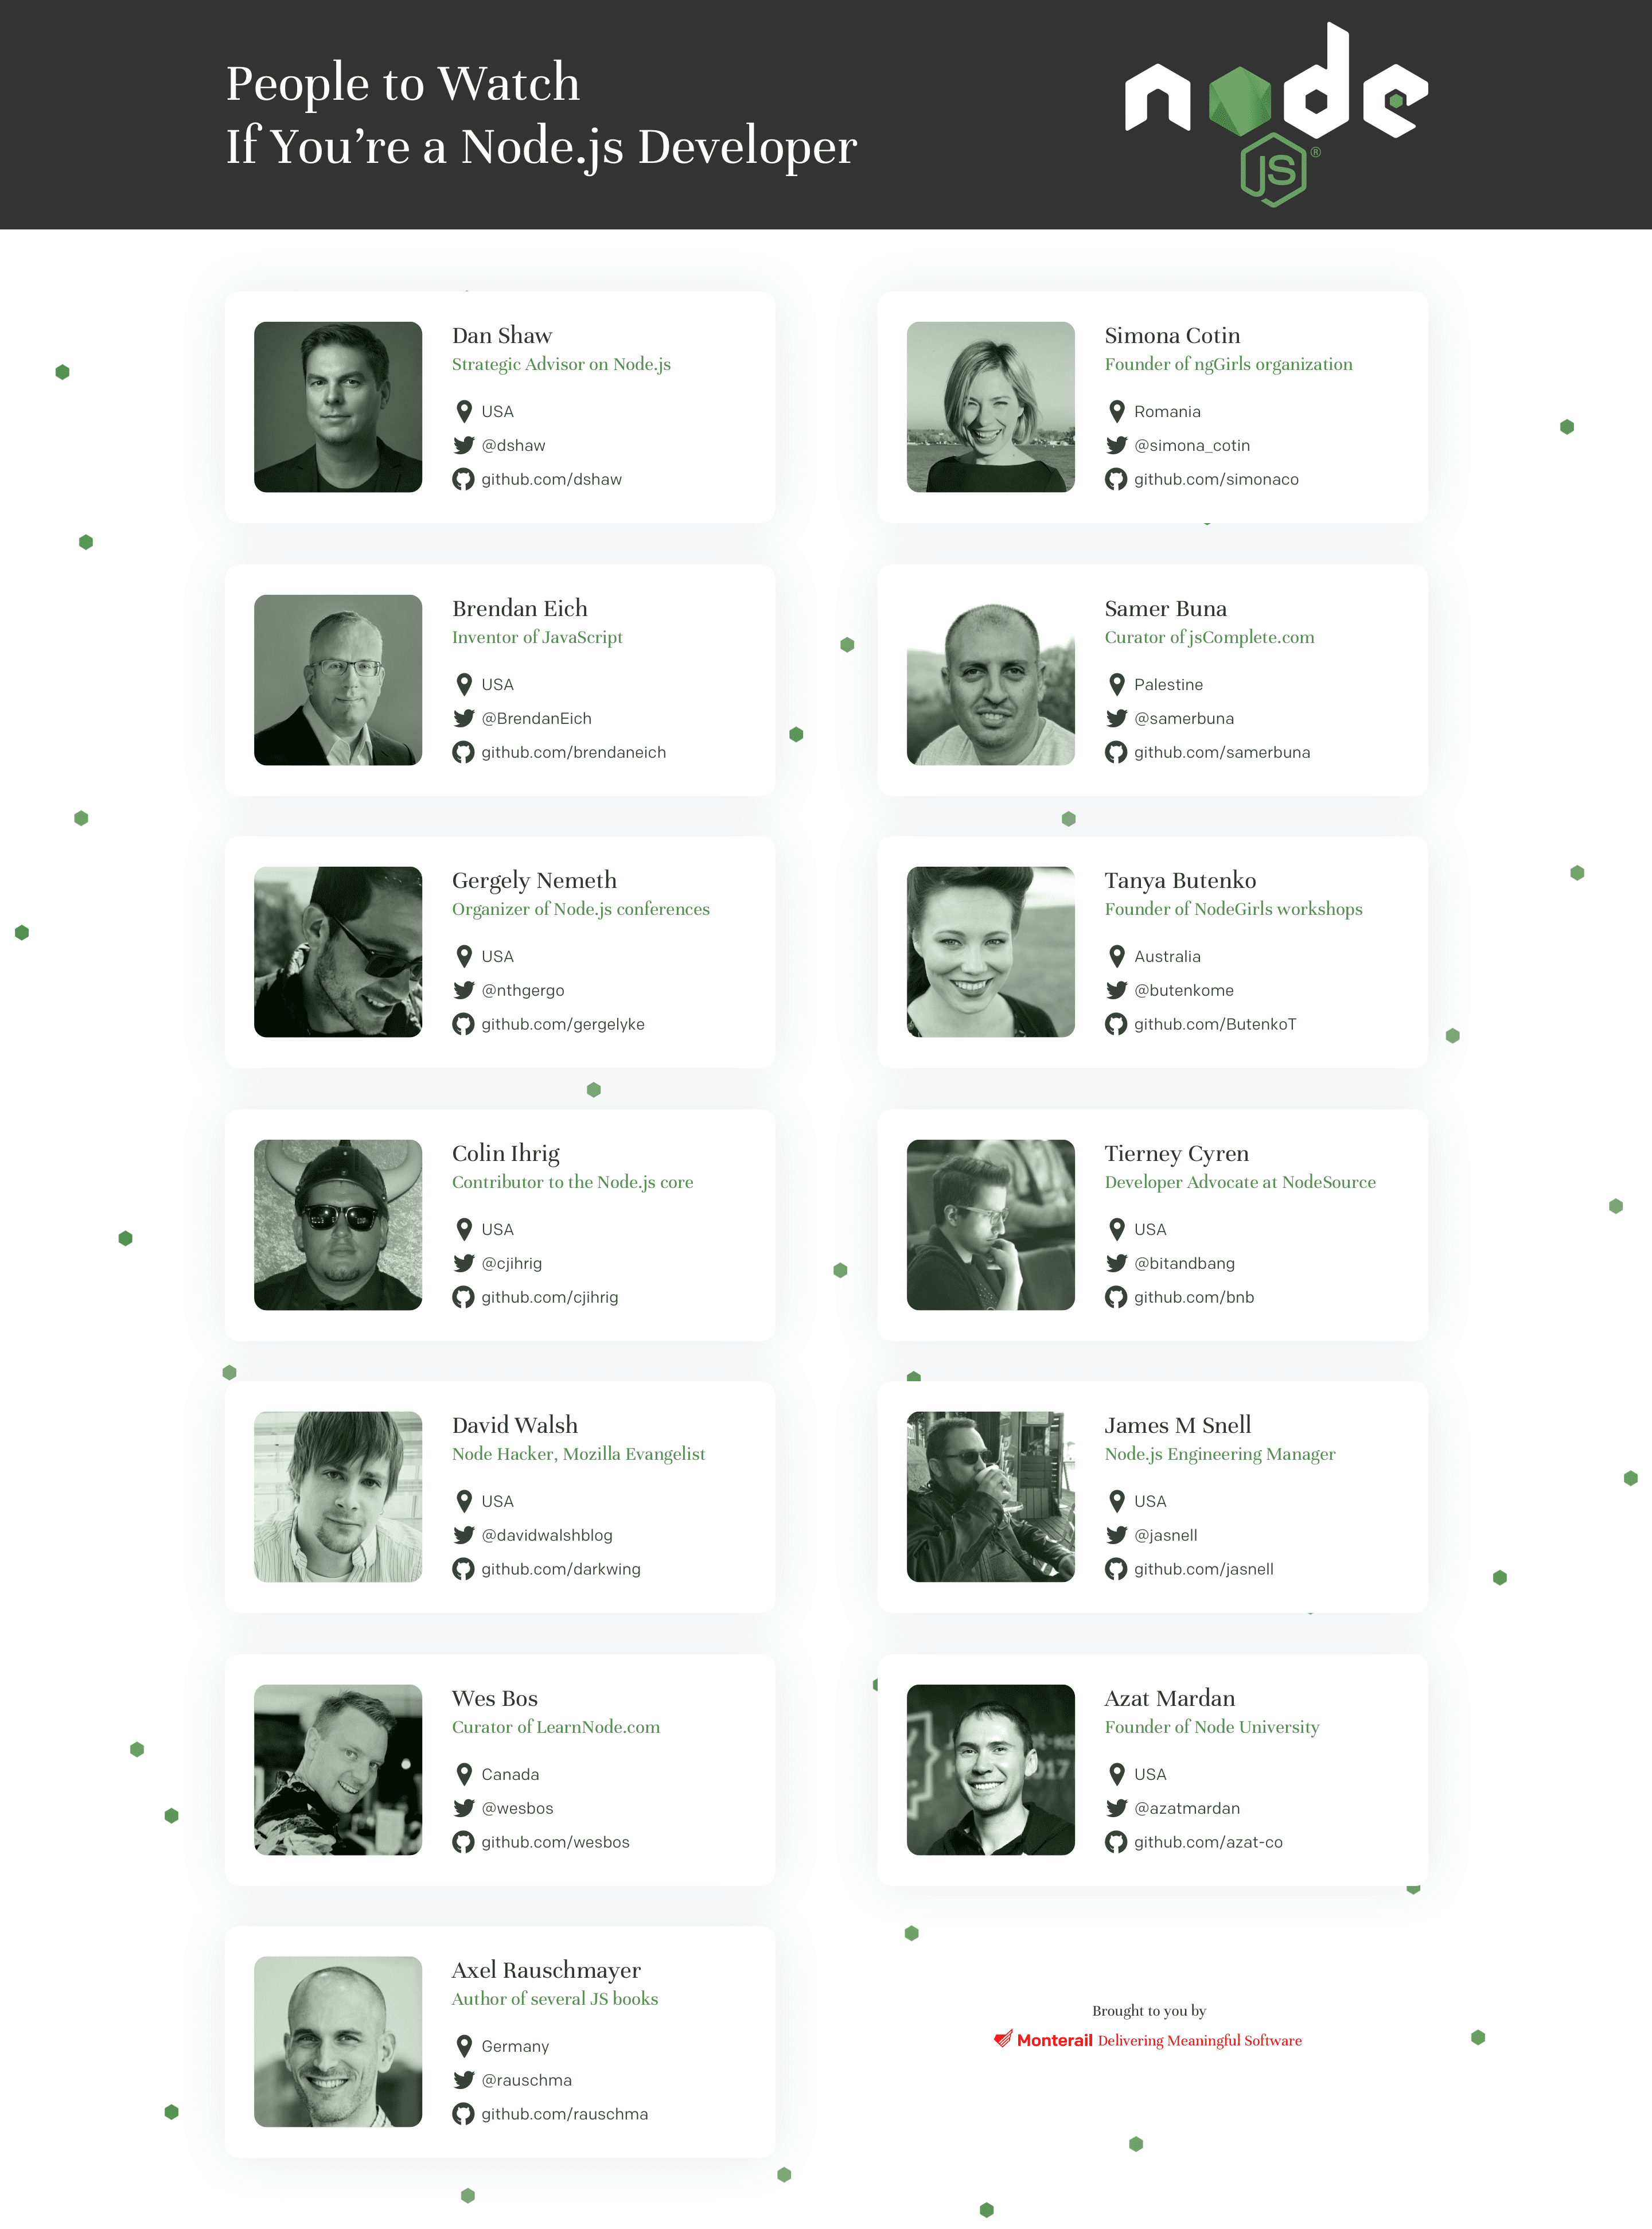 People To Watch If You're a Node.js Developer